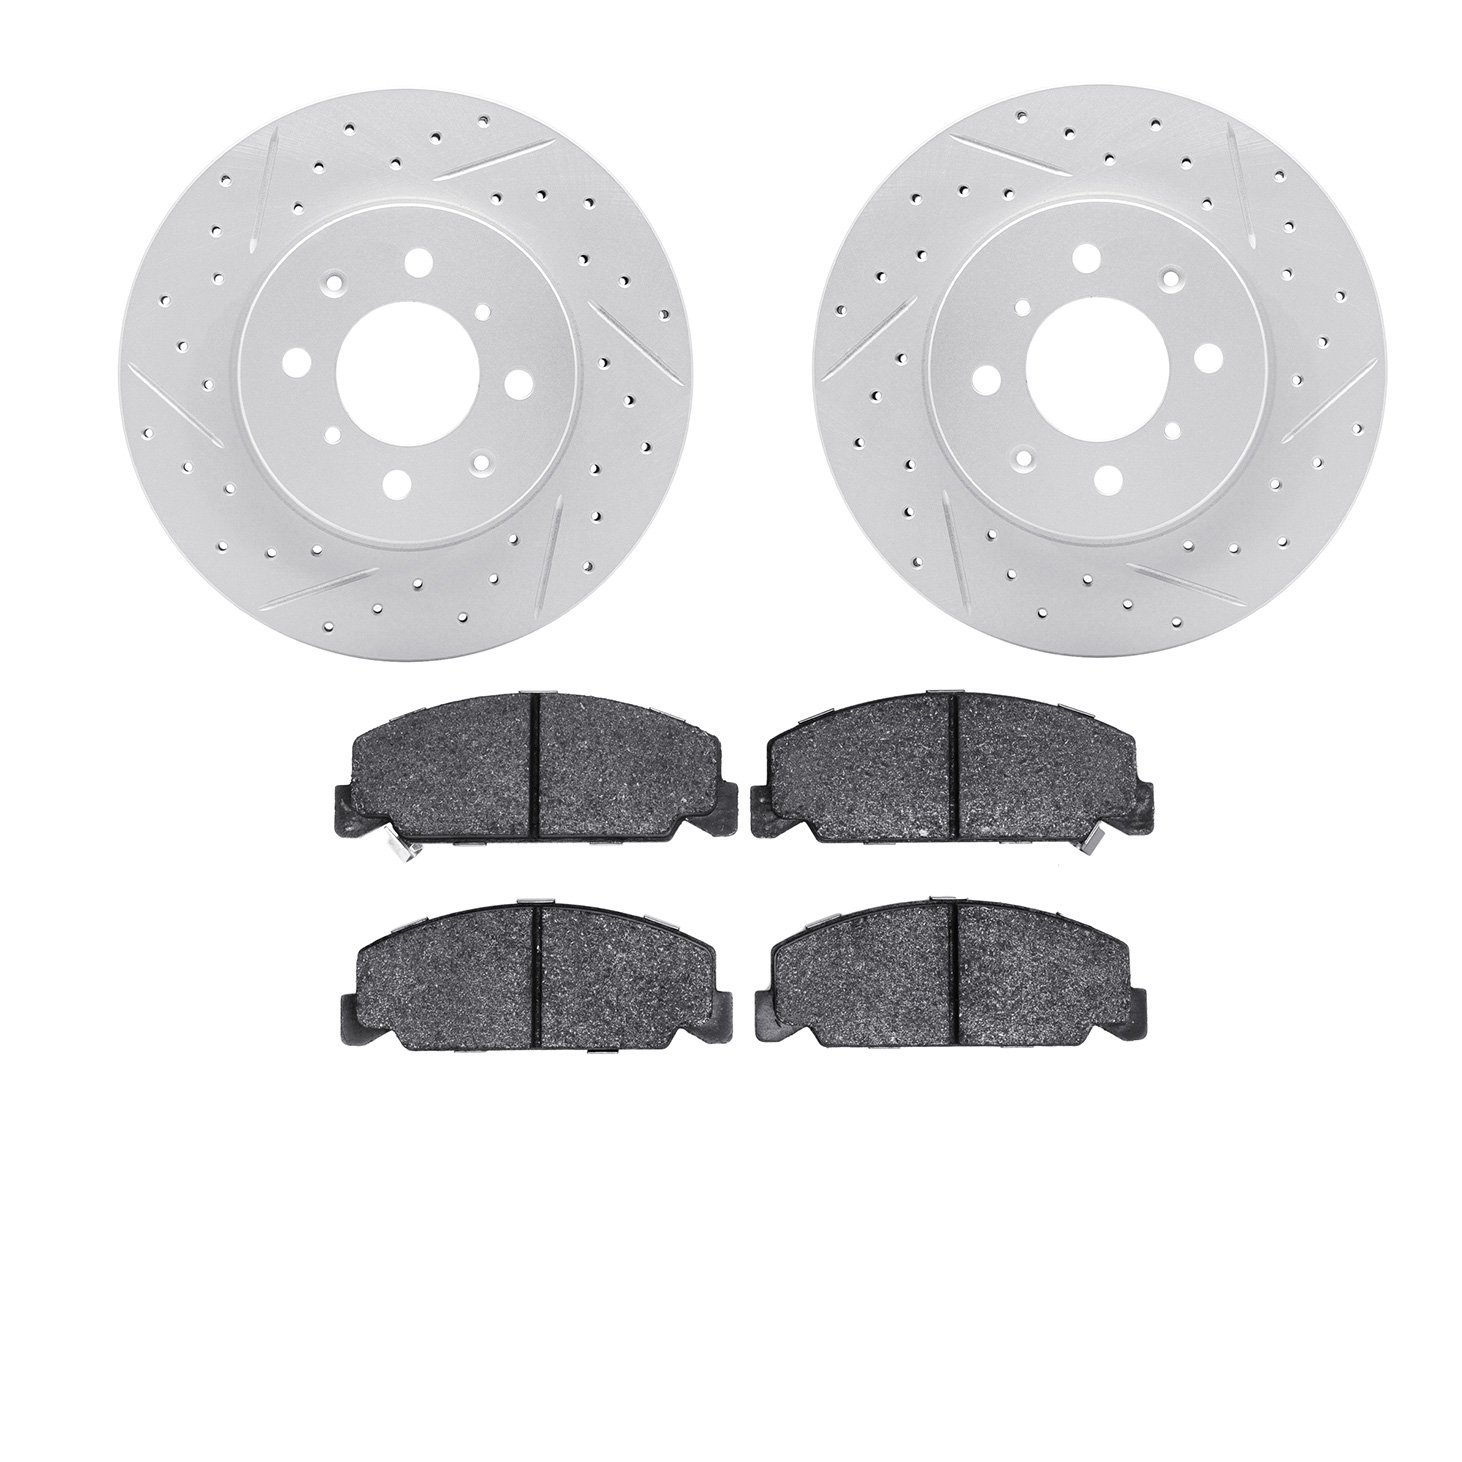 2502-59007 Geoperformance Drilled/Slotted Rotors w/5000 Advanced Brake Pads Kit, 1994-1995 Acura/Honda, Position: Front